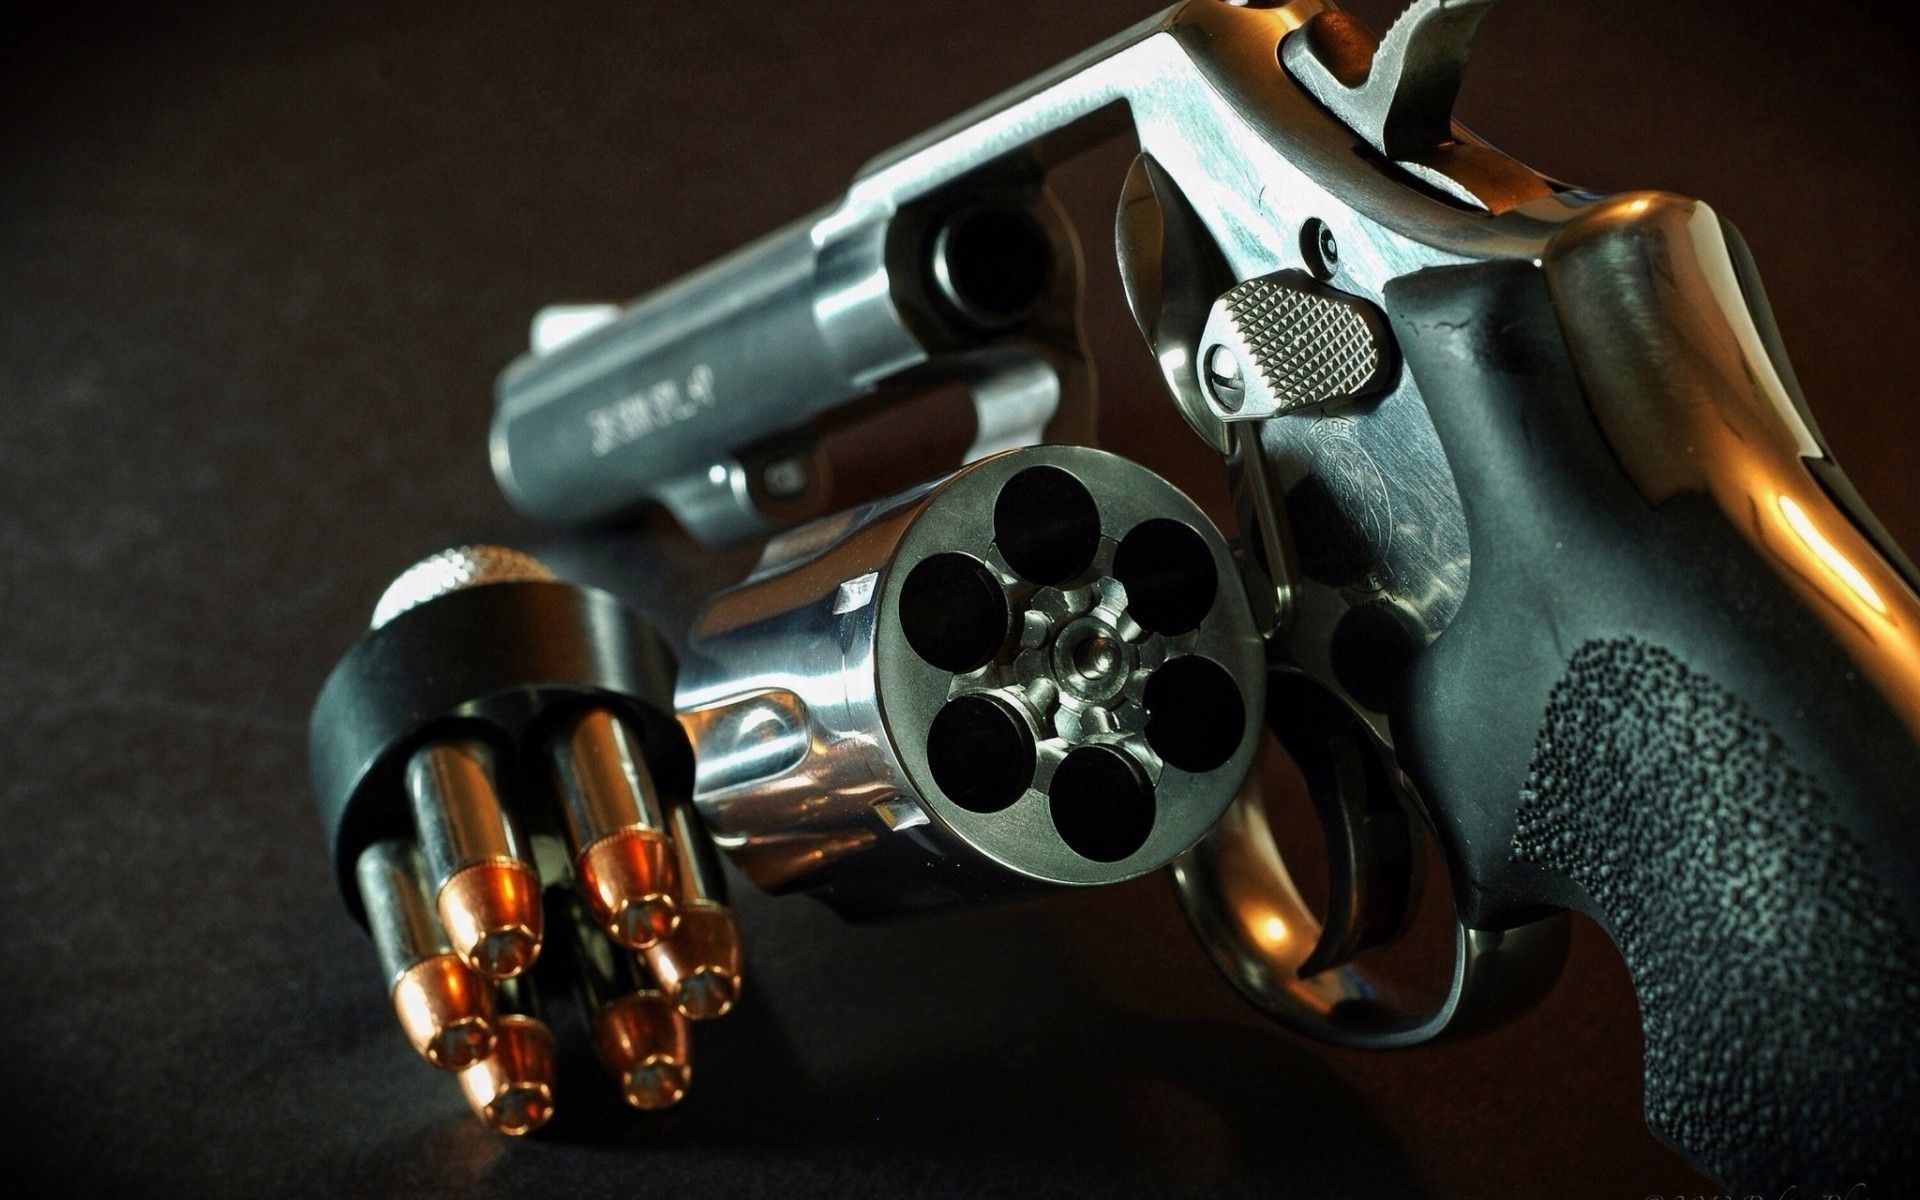 1920x1200 Collection of Gun Images Wallpapers on HDWallpapers 1920Ã1080 Gun Images  Wallpapers (40 Wallpapers